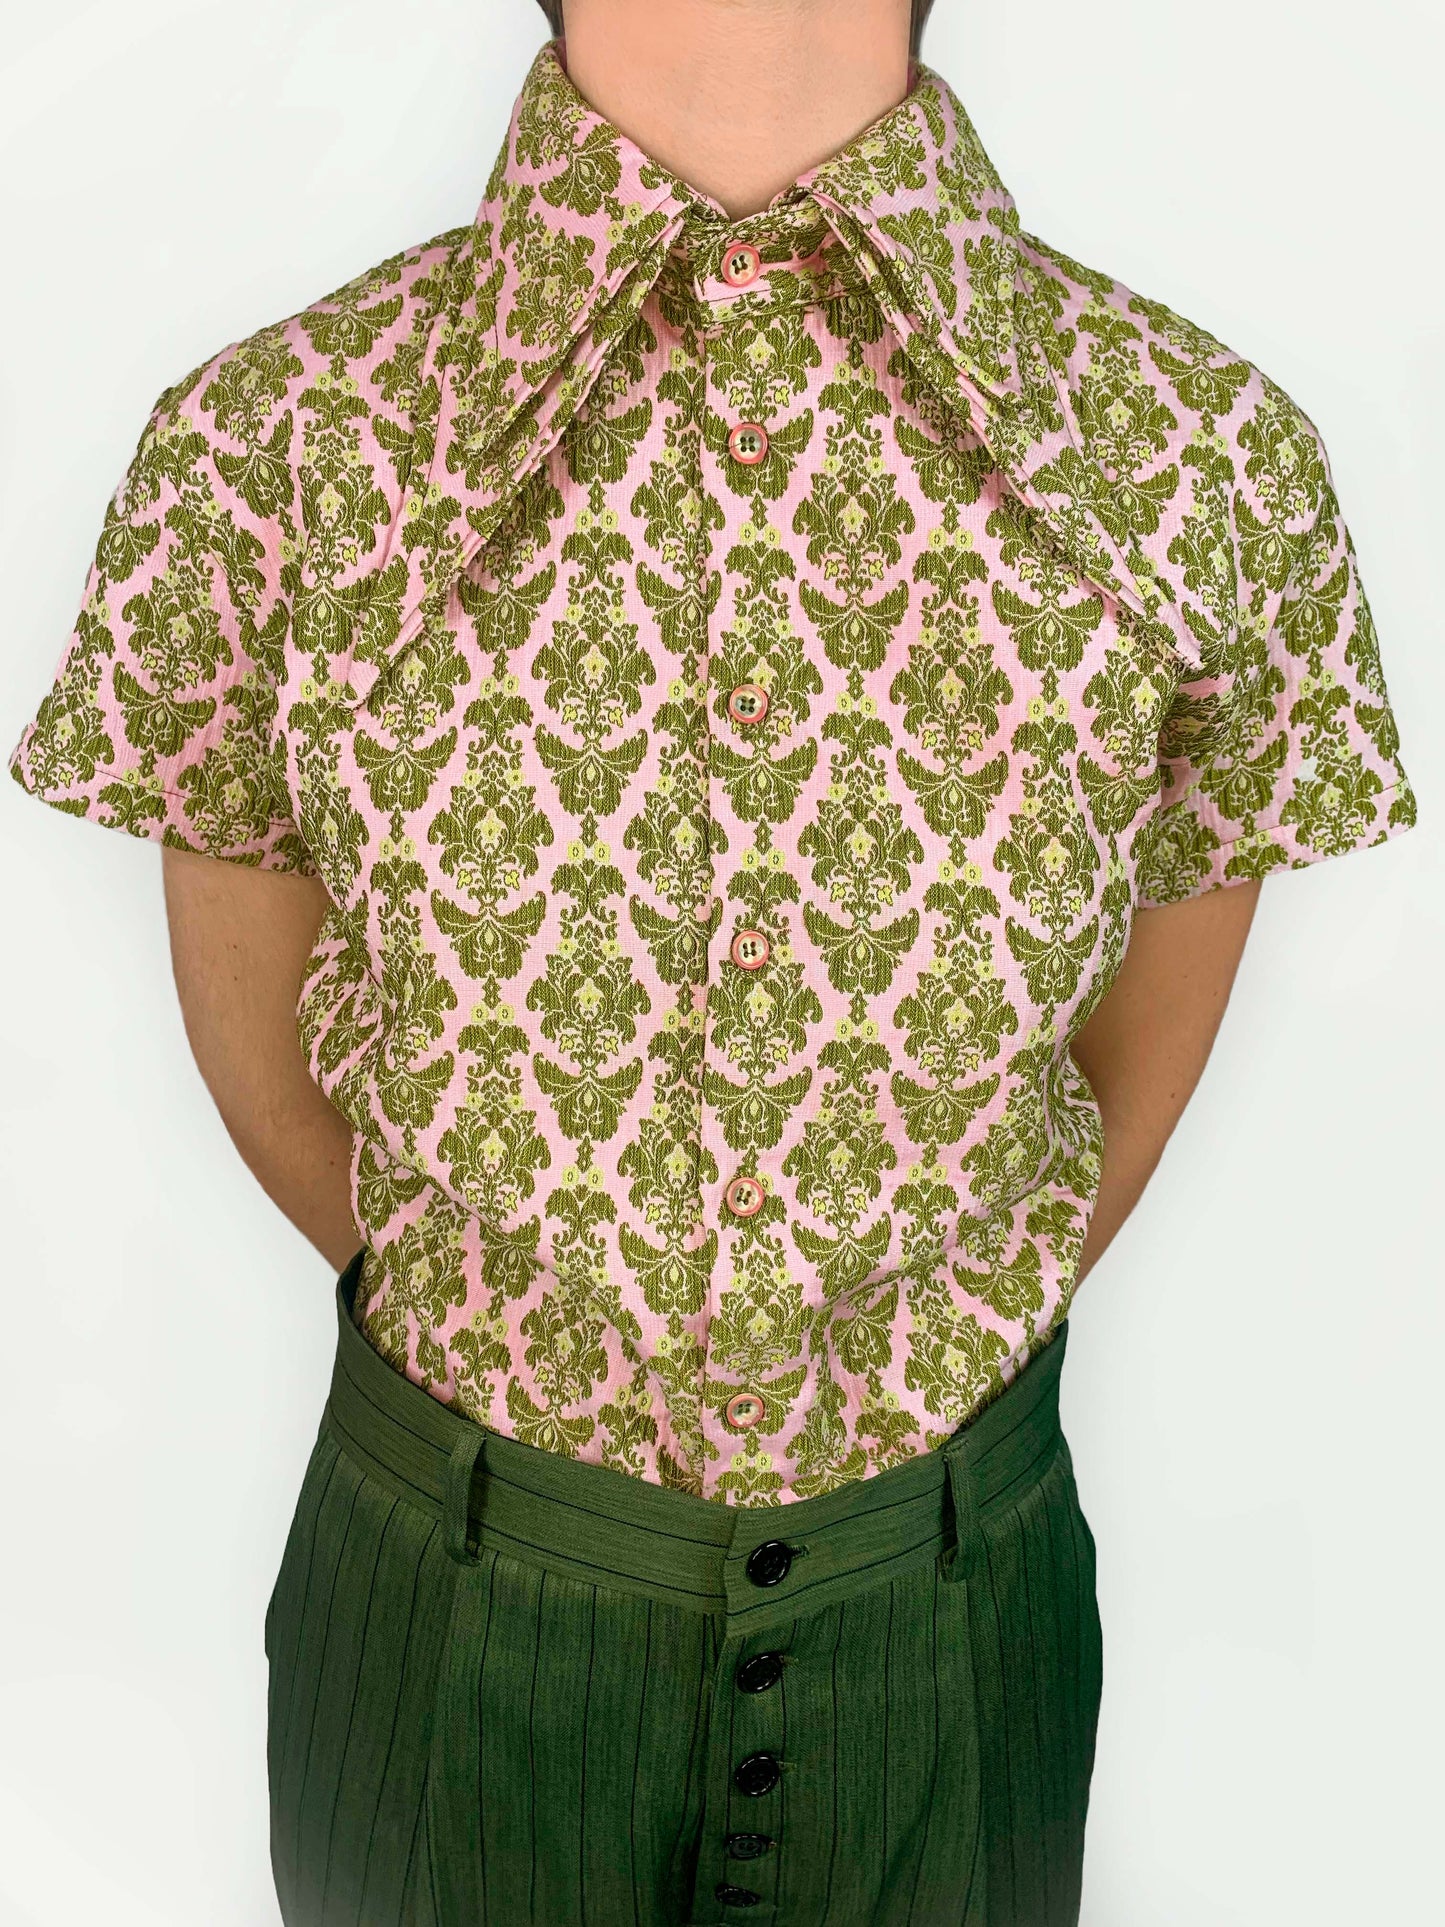 Smart Shirt Pink and Green With Three Collars Short Sleeve Unisex